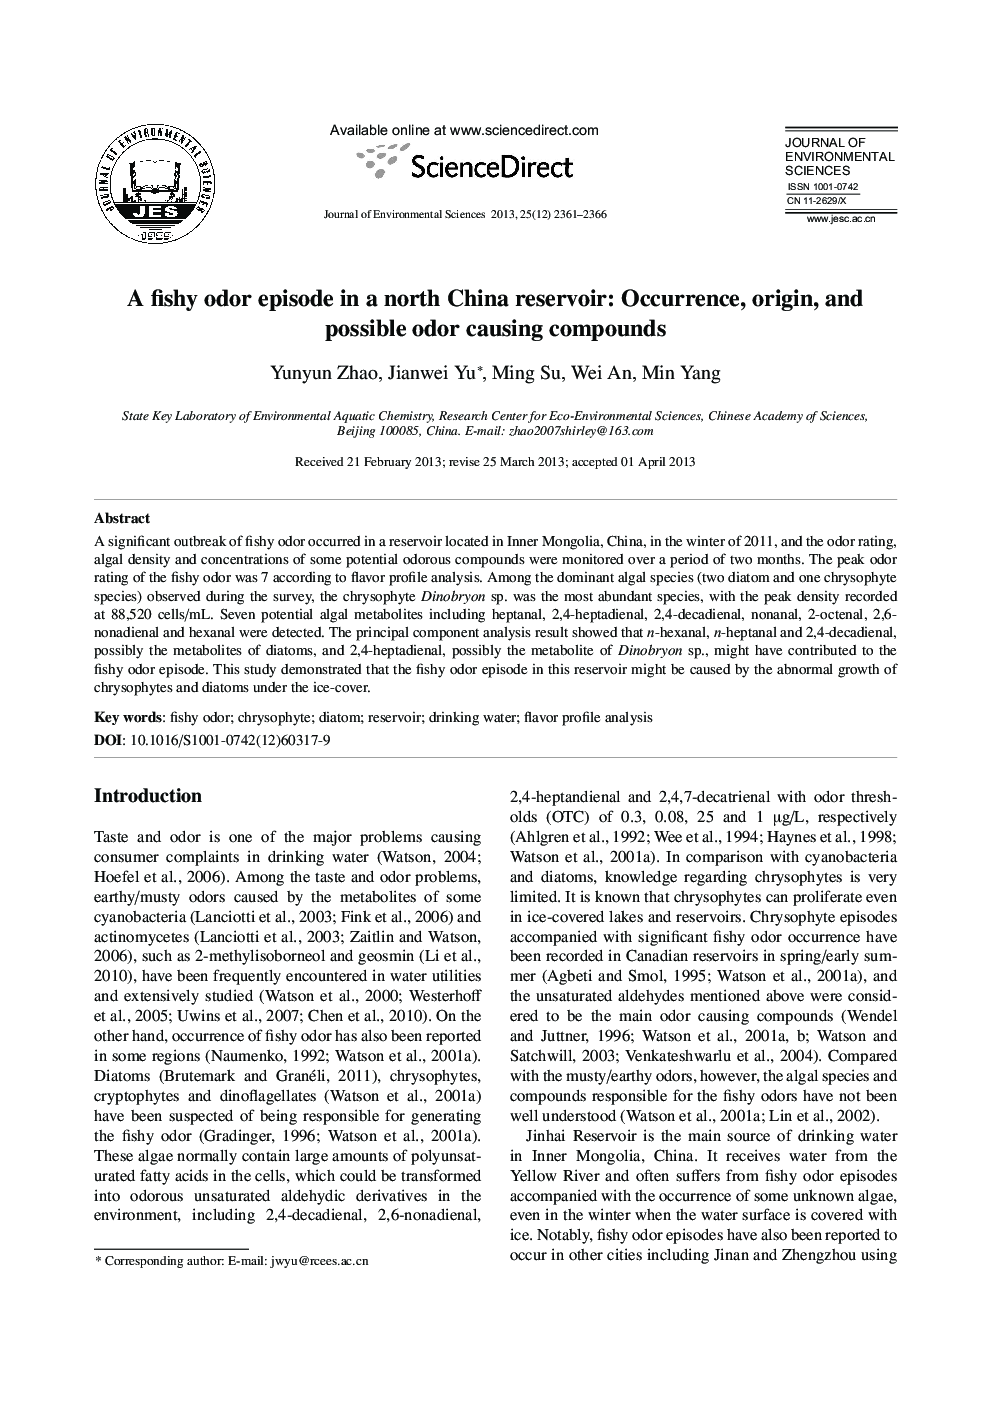 A fishy odor episode in a north China reservoir: Occurrence, origin, and possible odor causing compounds